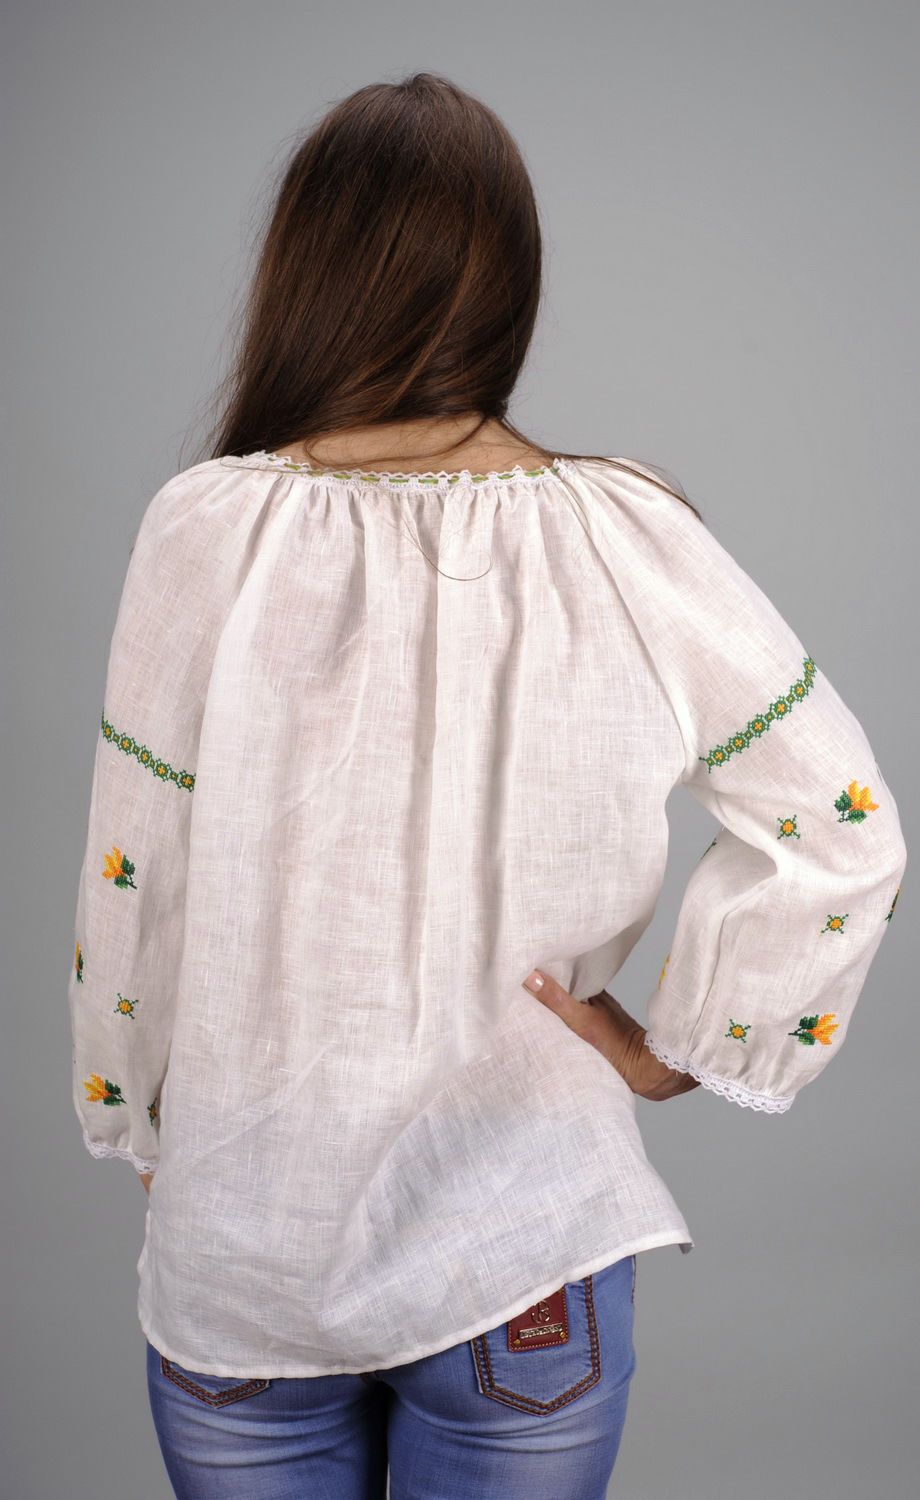 Ethnic tunic made of flax embroidered shirt photo 3